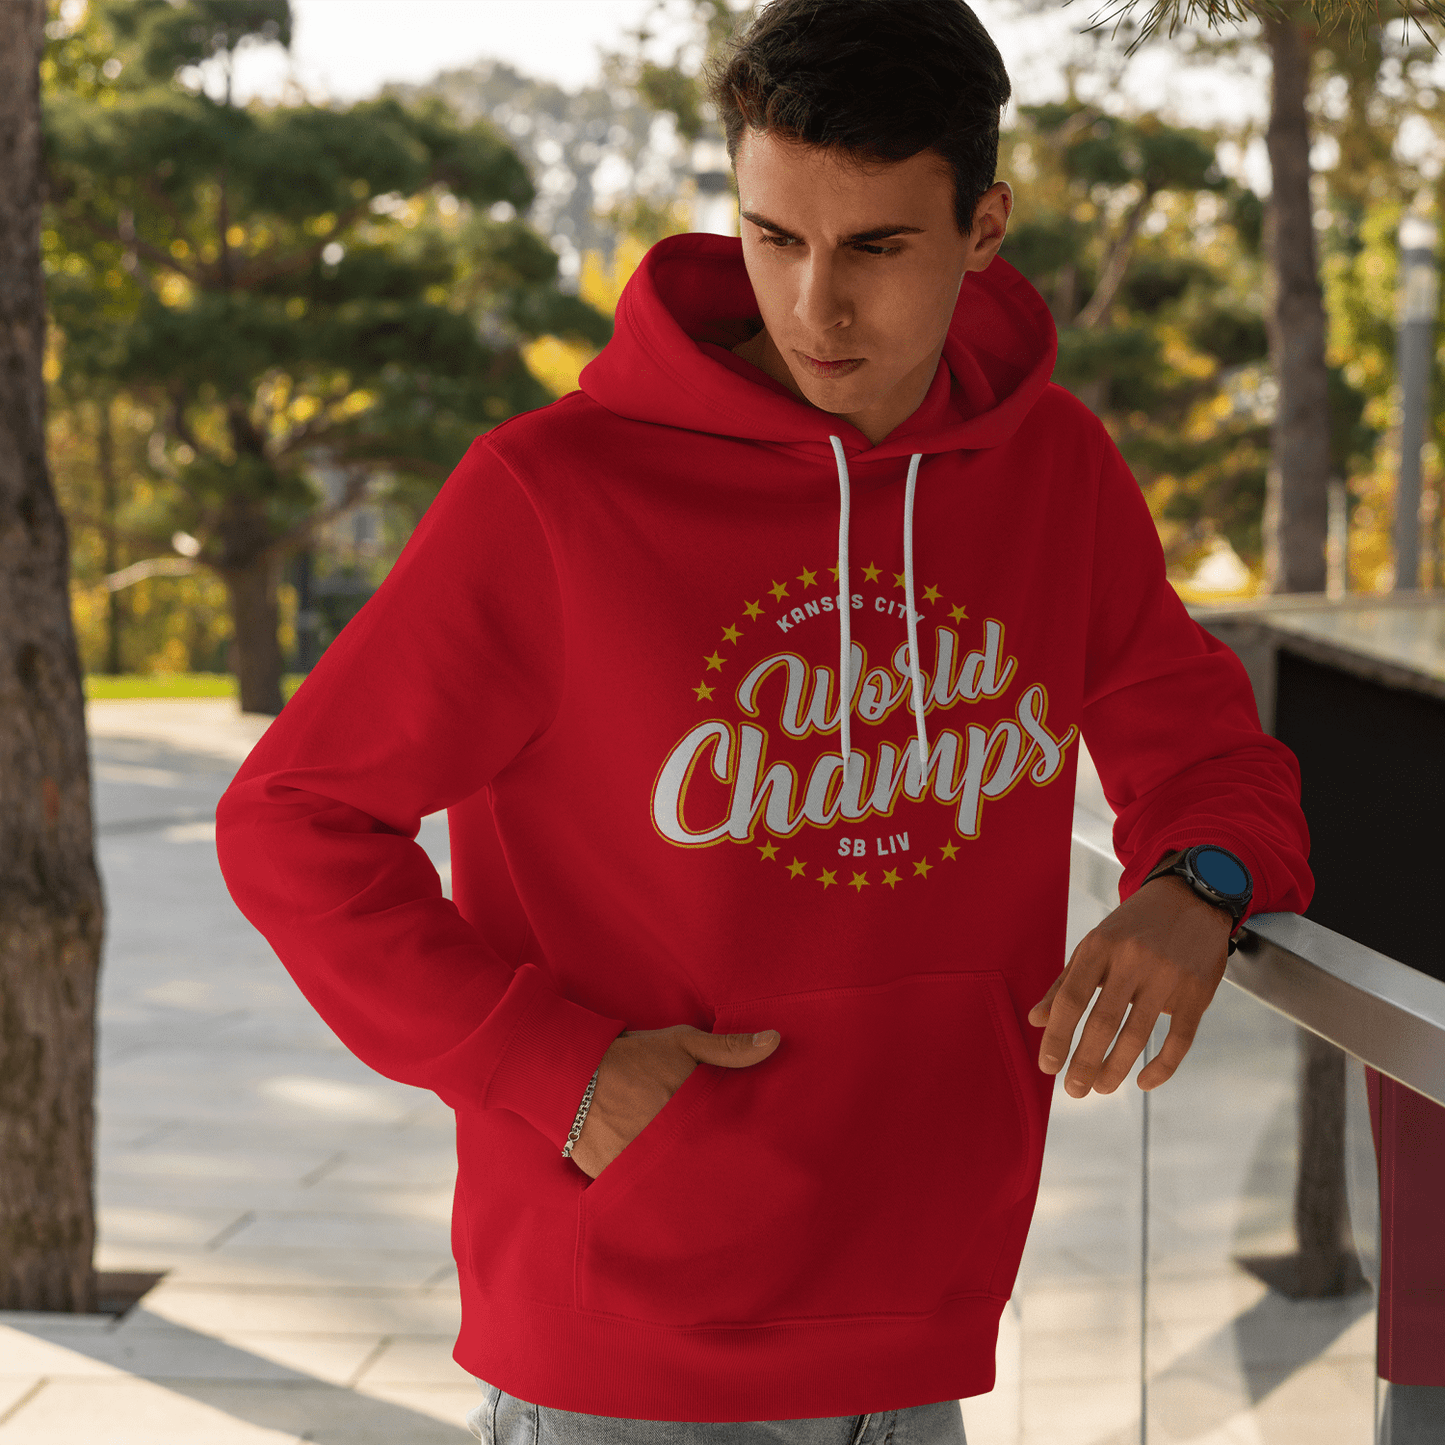 KC Swag Kansas City WORLD CHAMPS SBLIV on red fleece pullover hoodie worn by male model standing in outdoor plaza